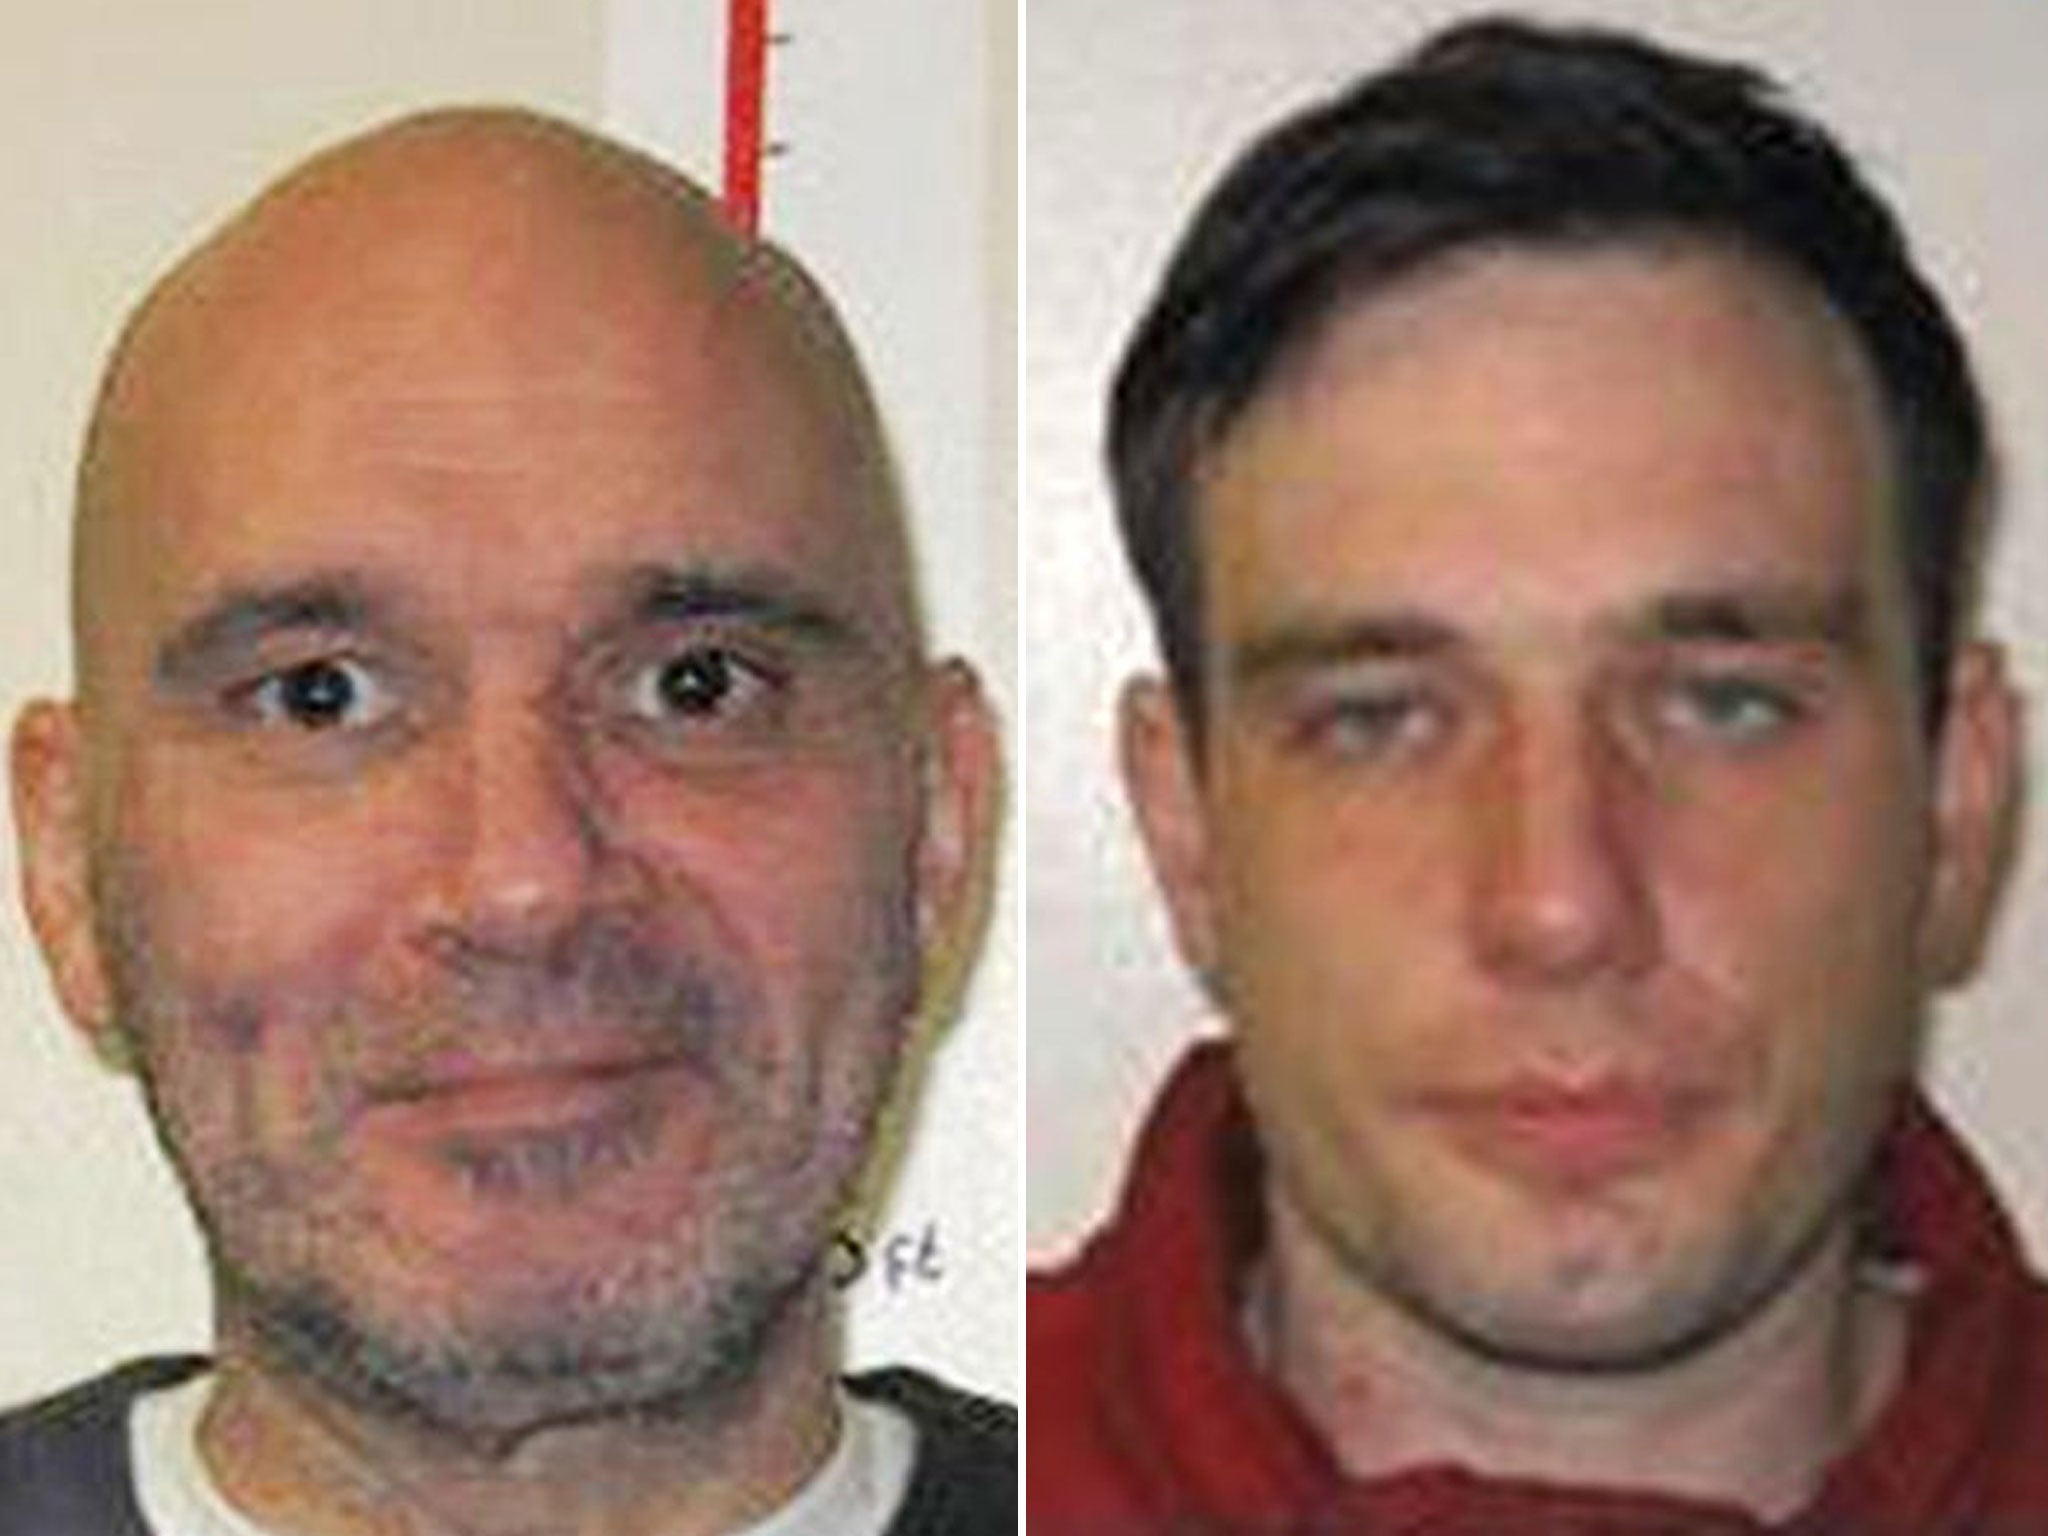 Paul Oddysses, left, and Lewis Powter, right, have escaped from a Suffolk prison